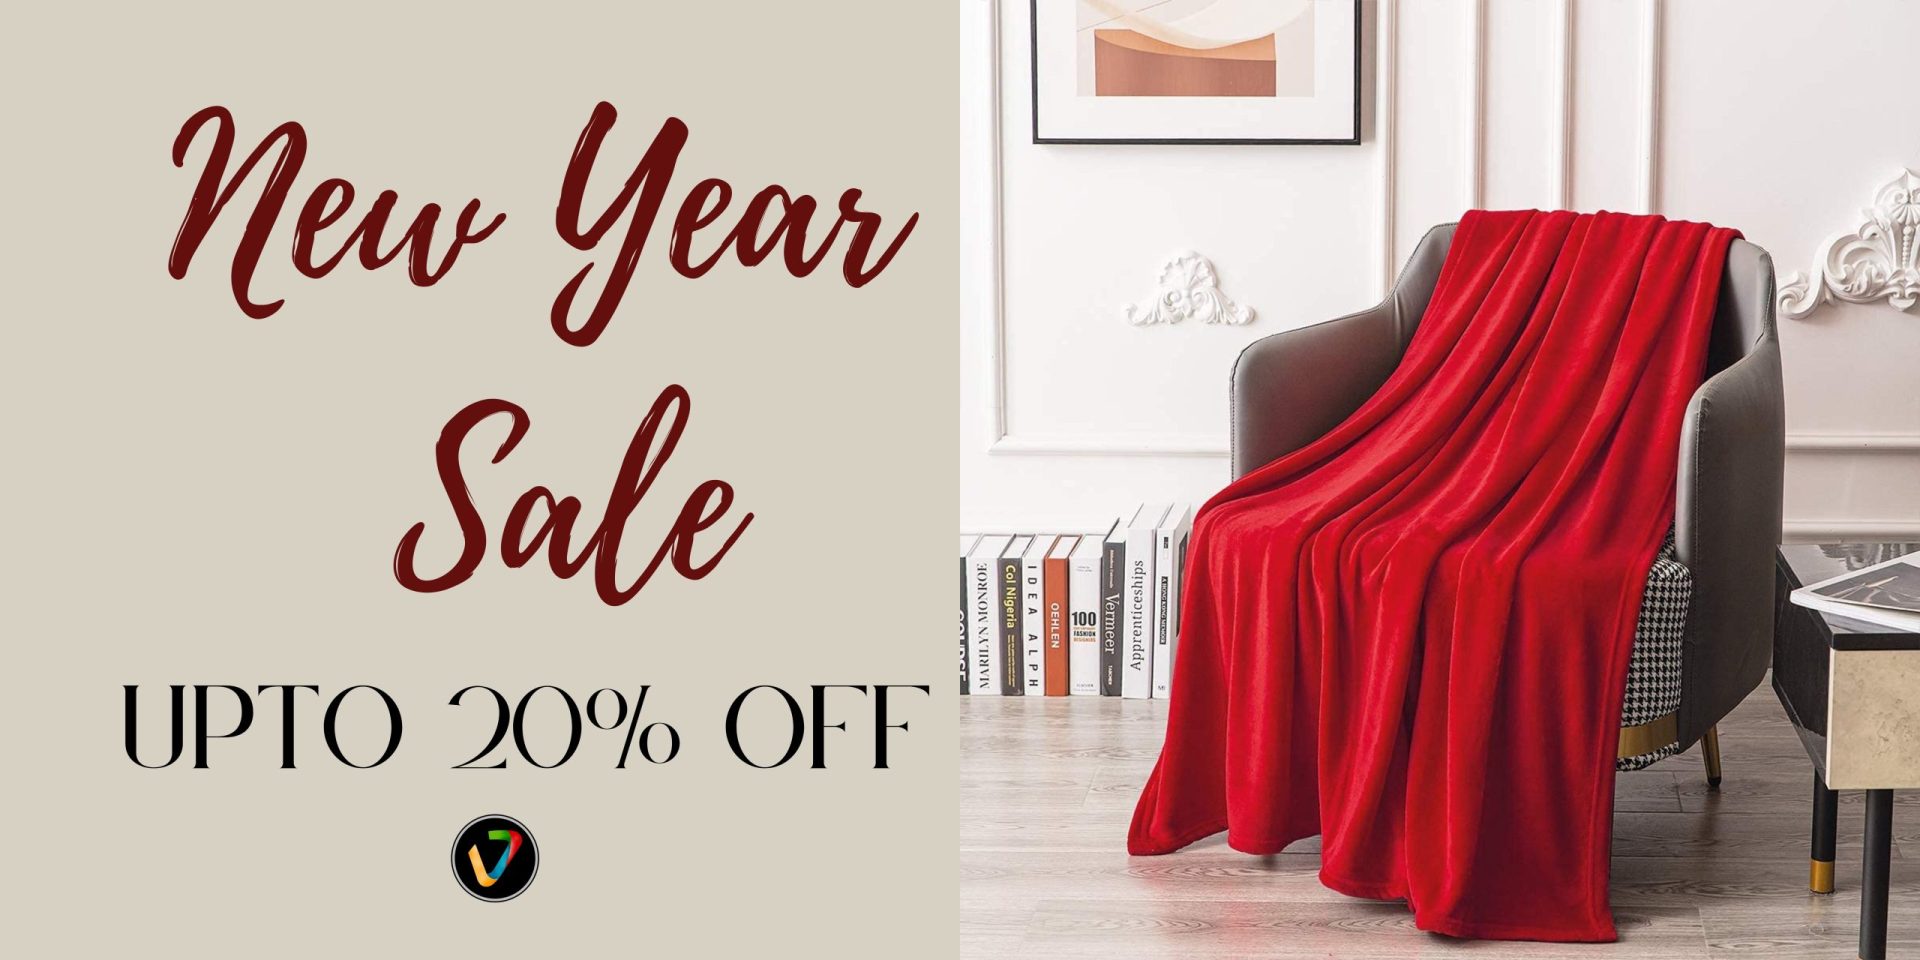 New year sale on bedding Voice 7 uk